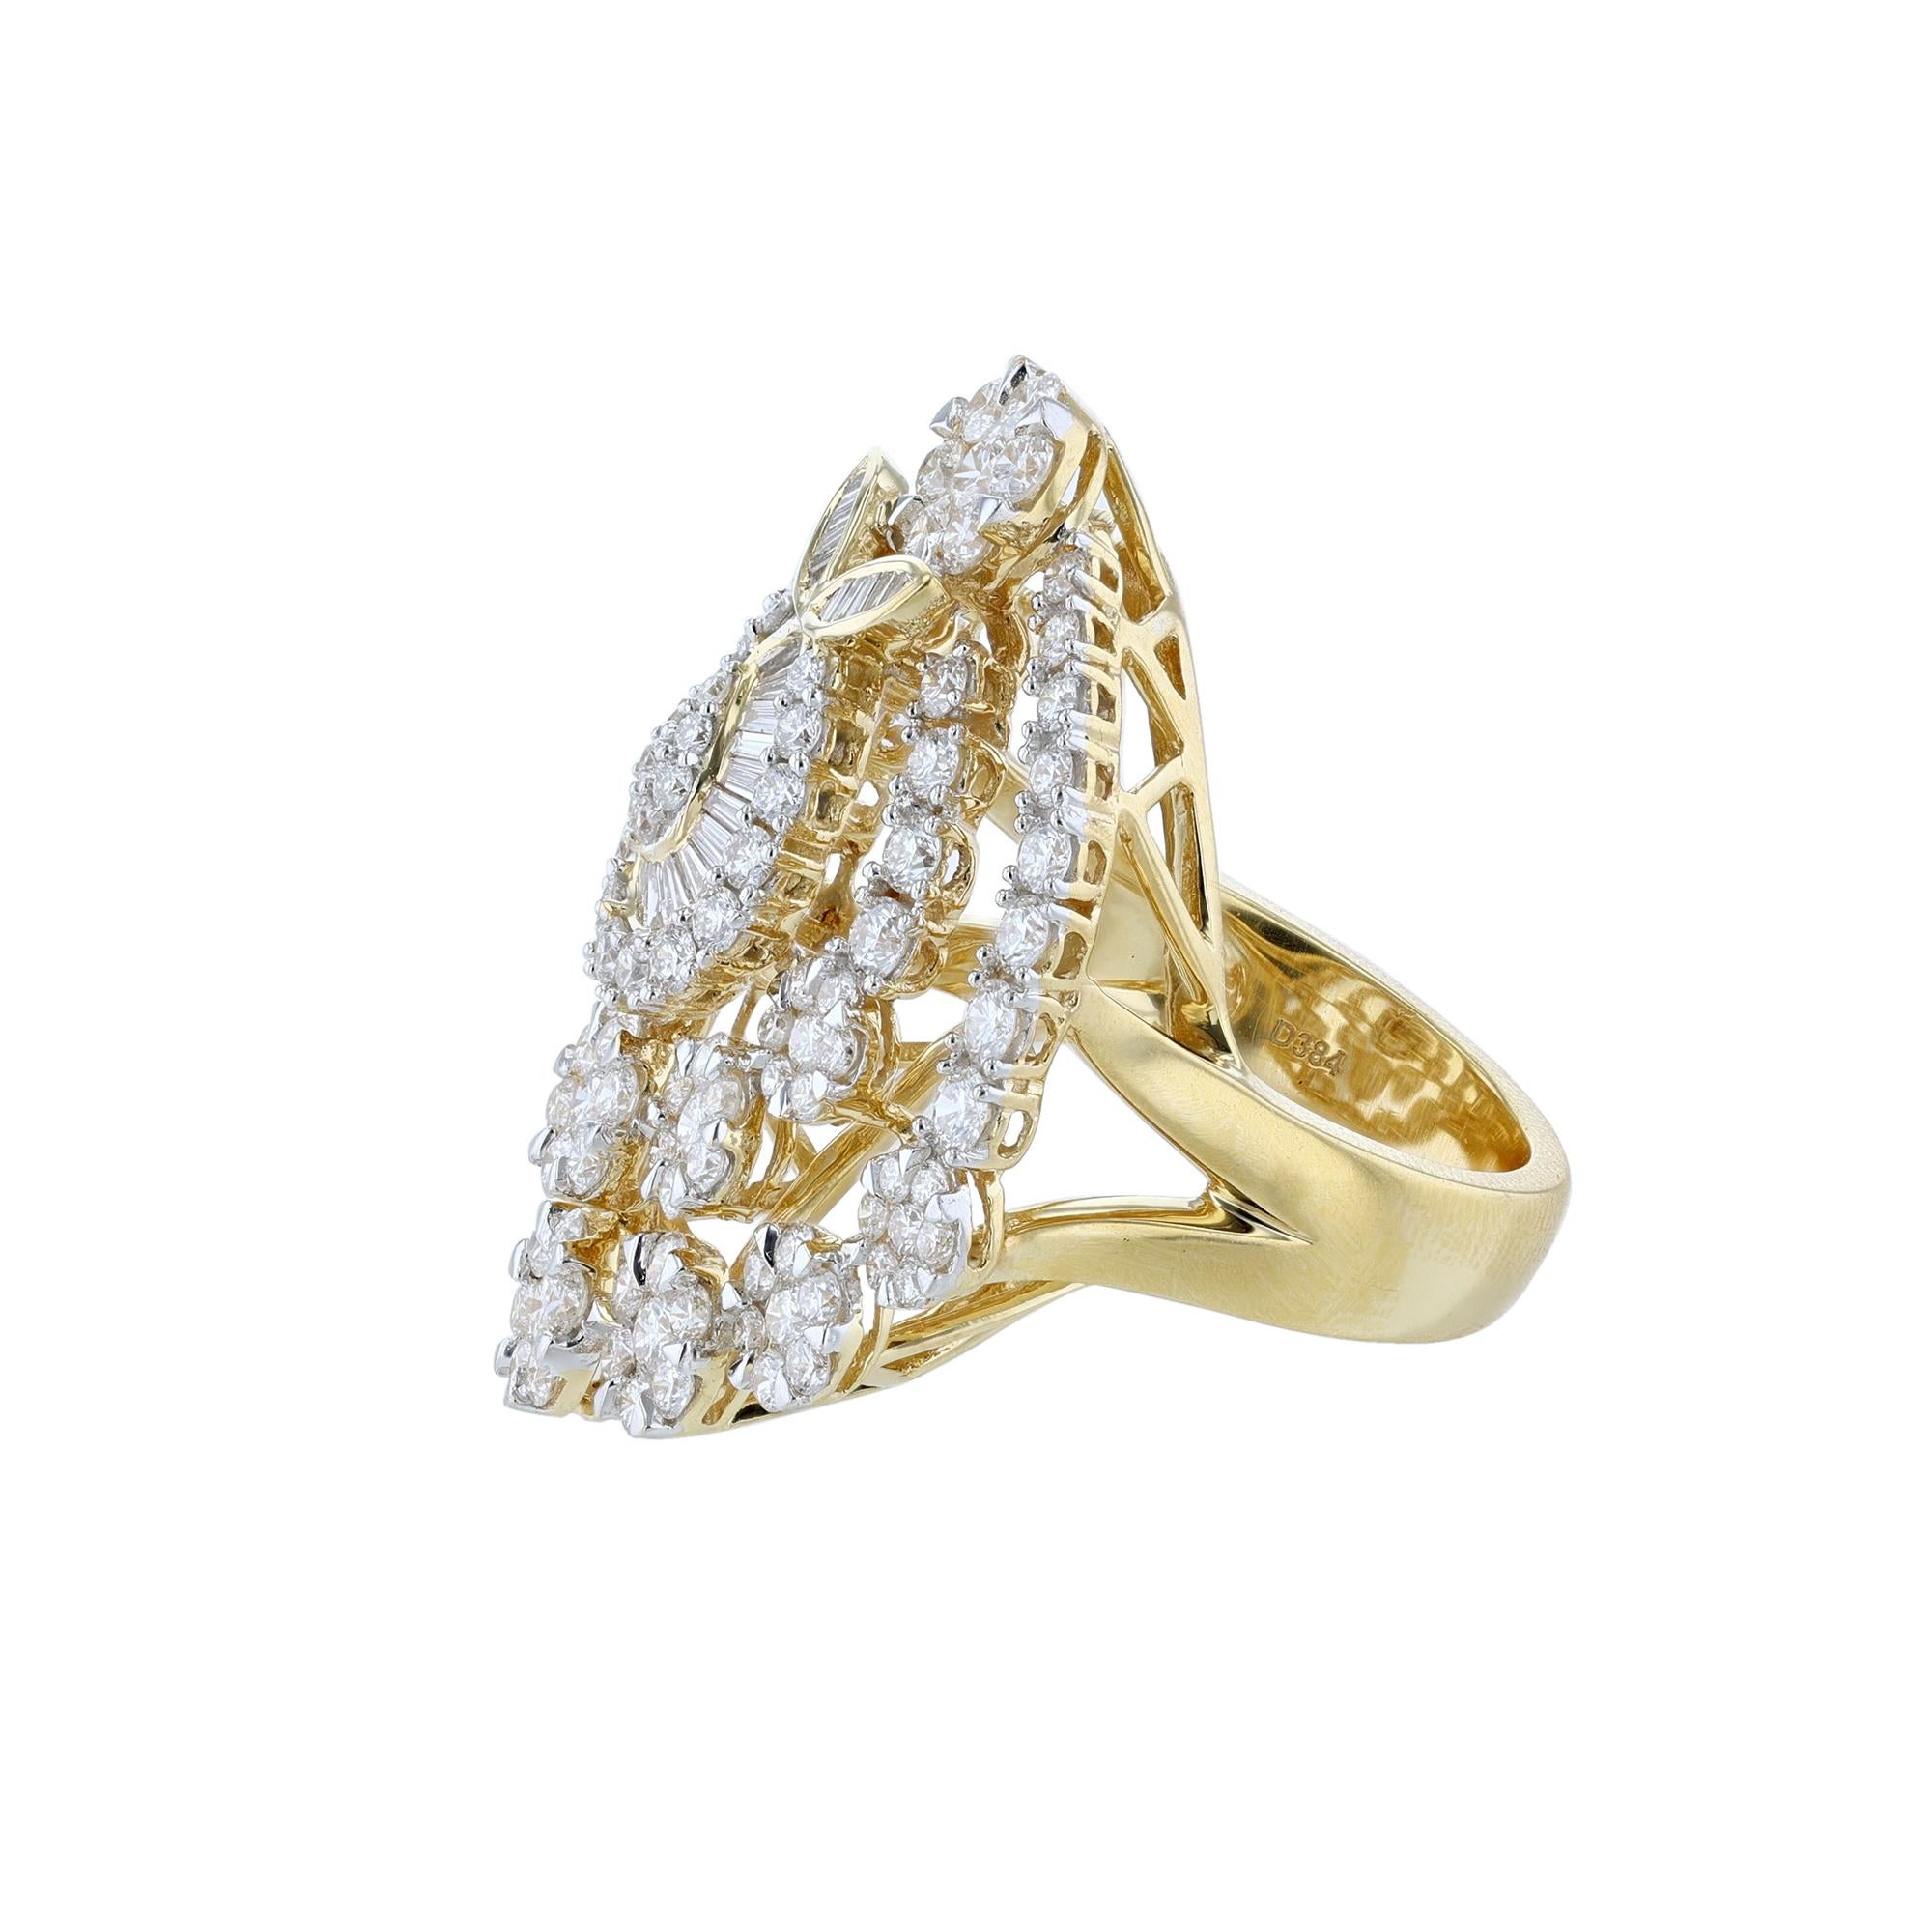 Contemporary 18K Yellow Gold Round Baguette Diamond Cocktail Ring, 3.84 Carats For Sale